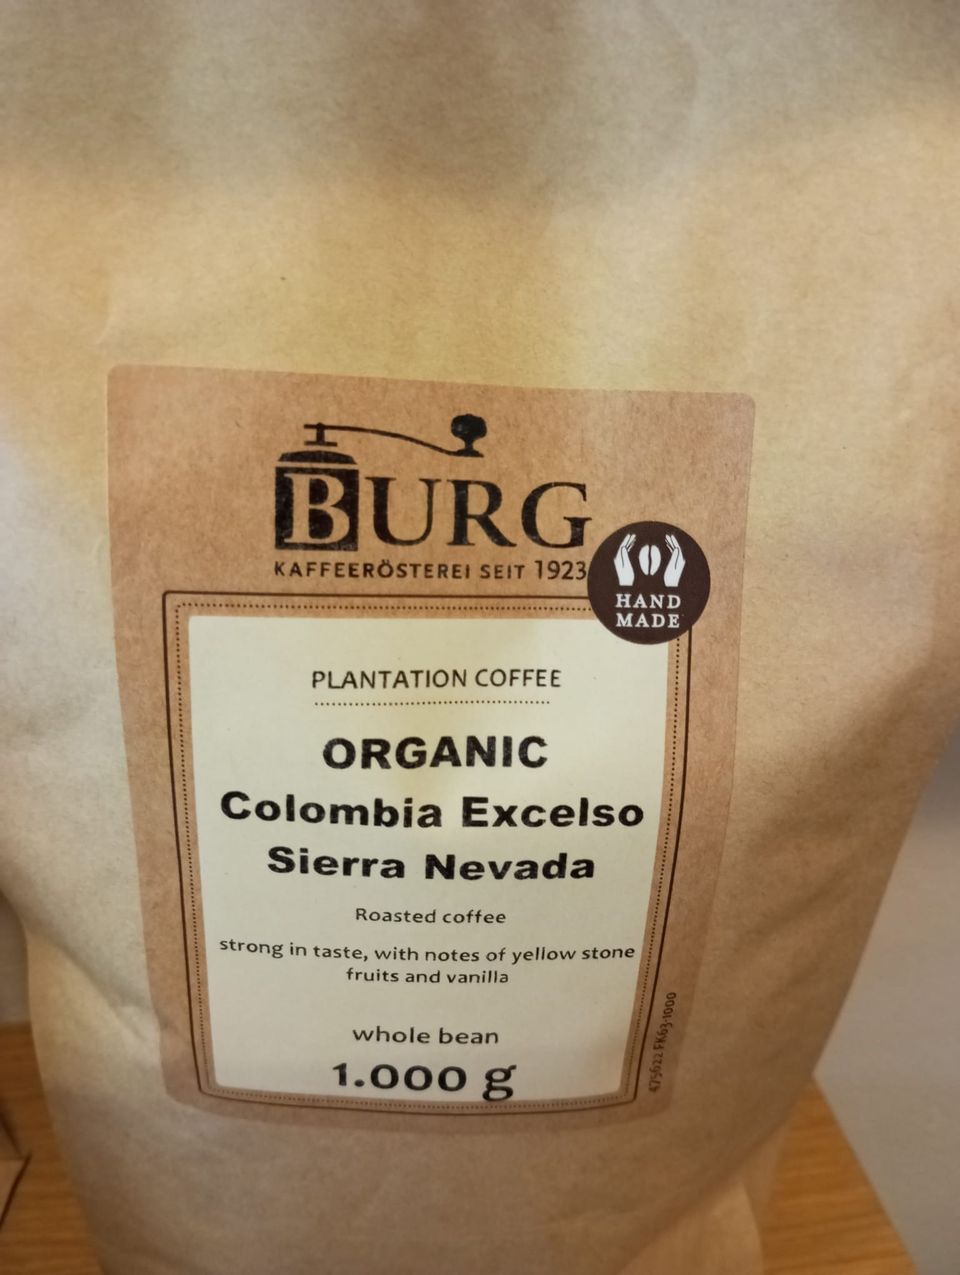 Organic Colombia Excelso Sierra Nevada